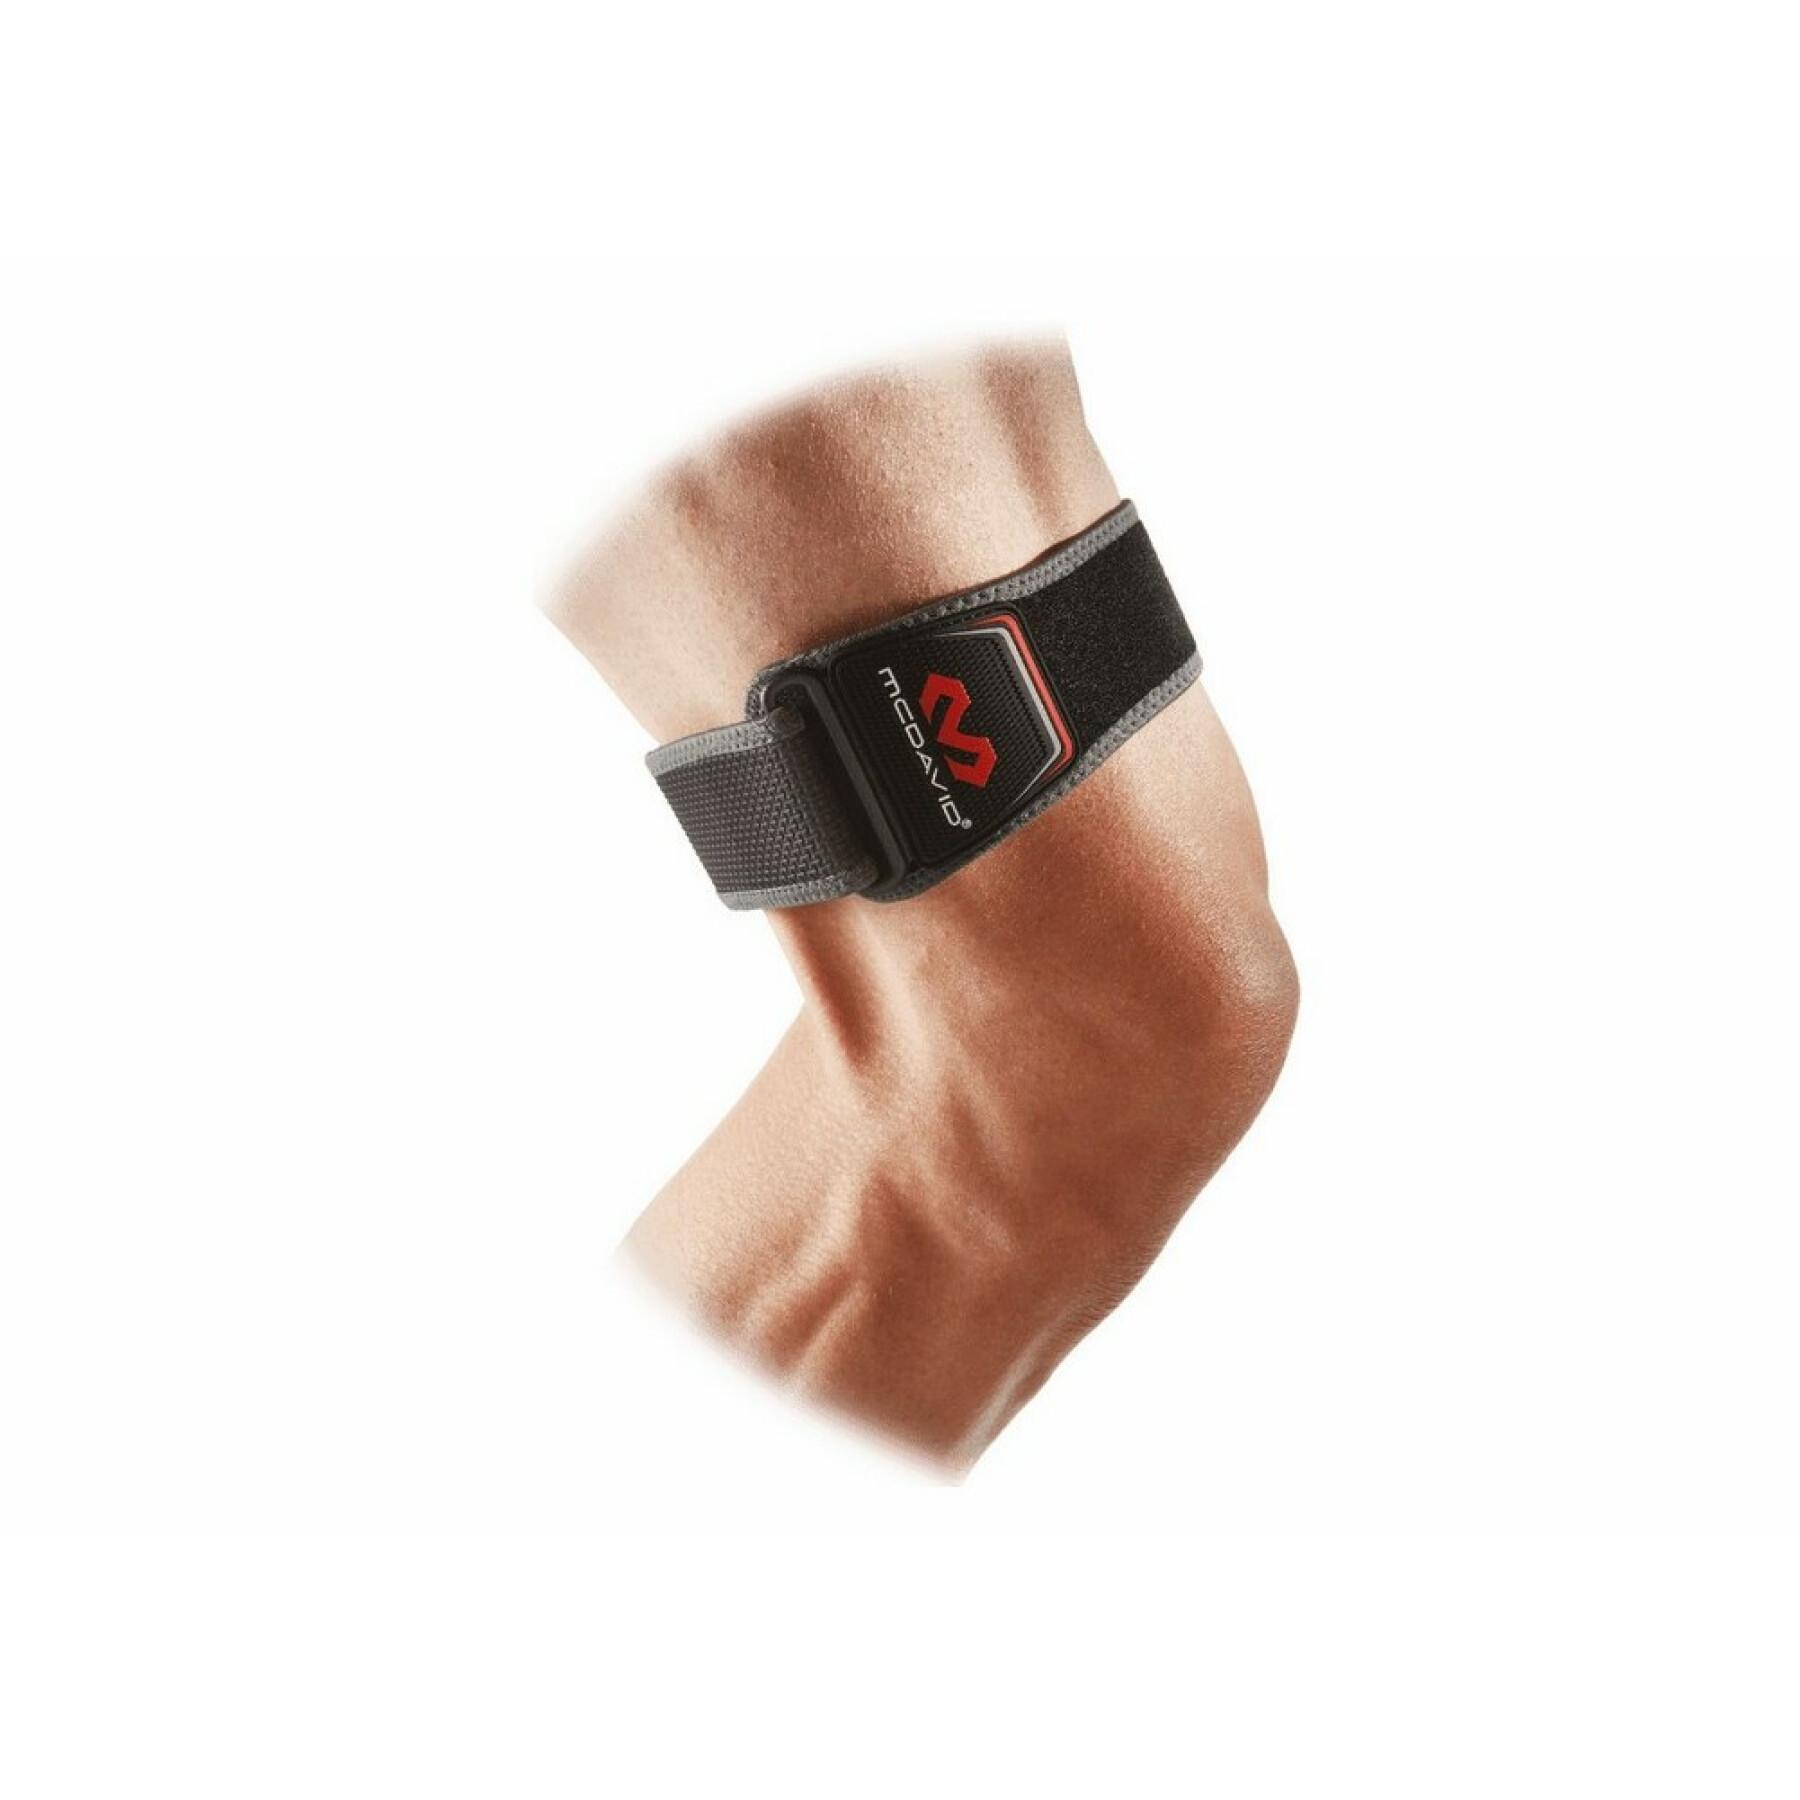 Iliotomie band McDavid elite runners therapy